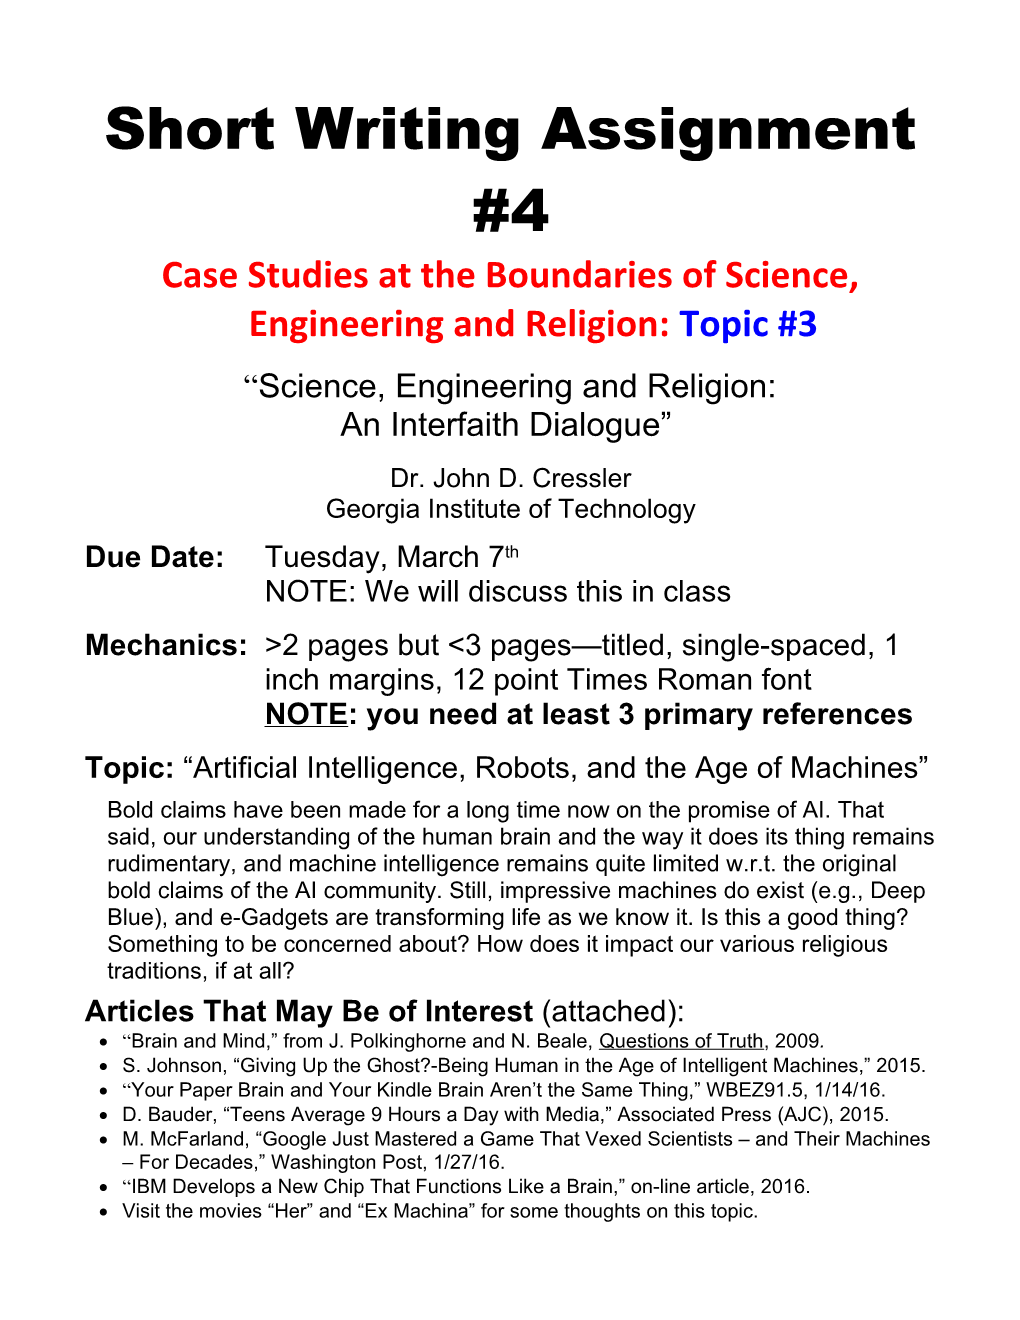 Case Studies at the Boundaries of Science, Engineering and Religion: Topic #3